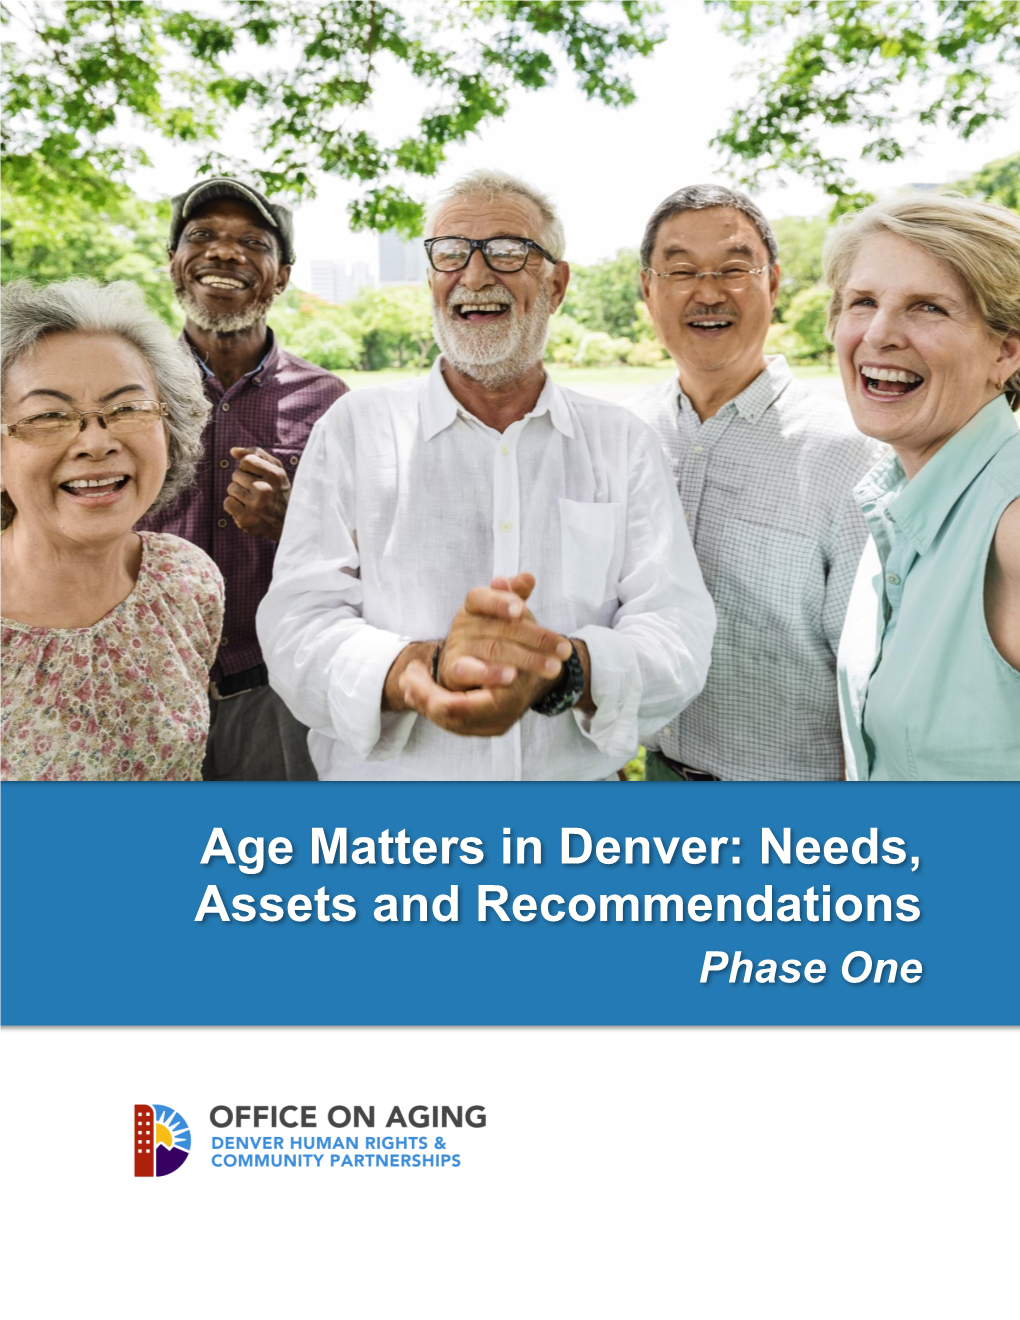 Age Matters in Denver: Needs, Assets and Recommendations Phase One